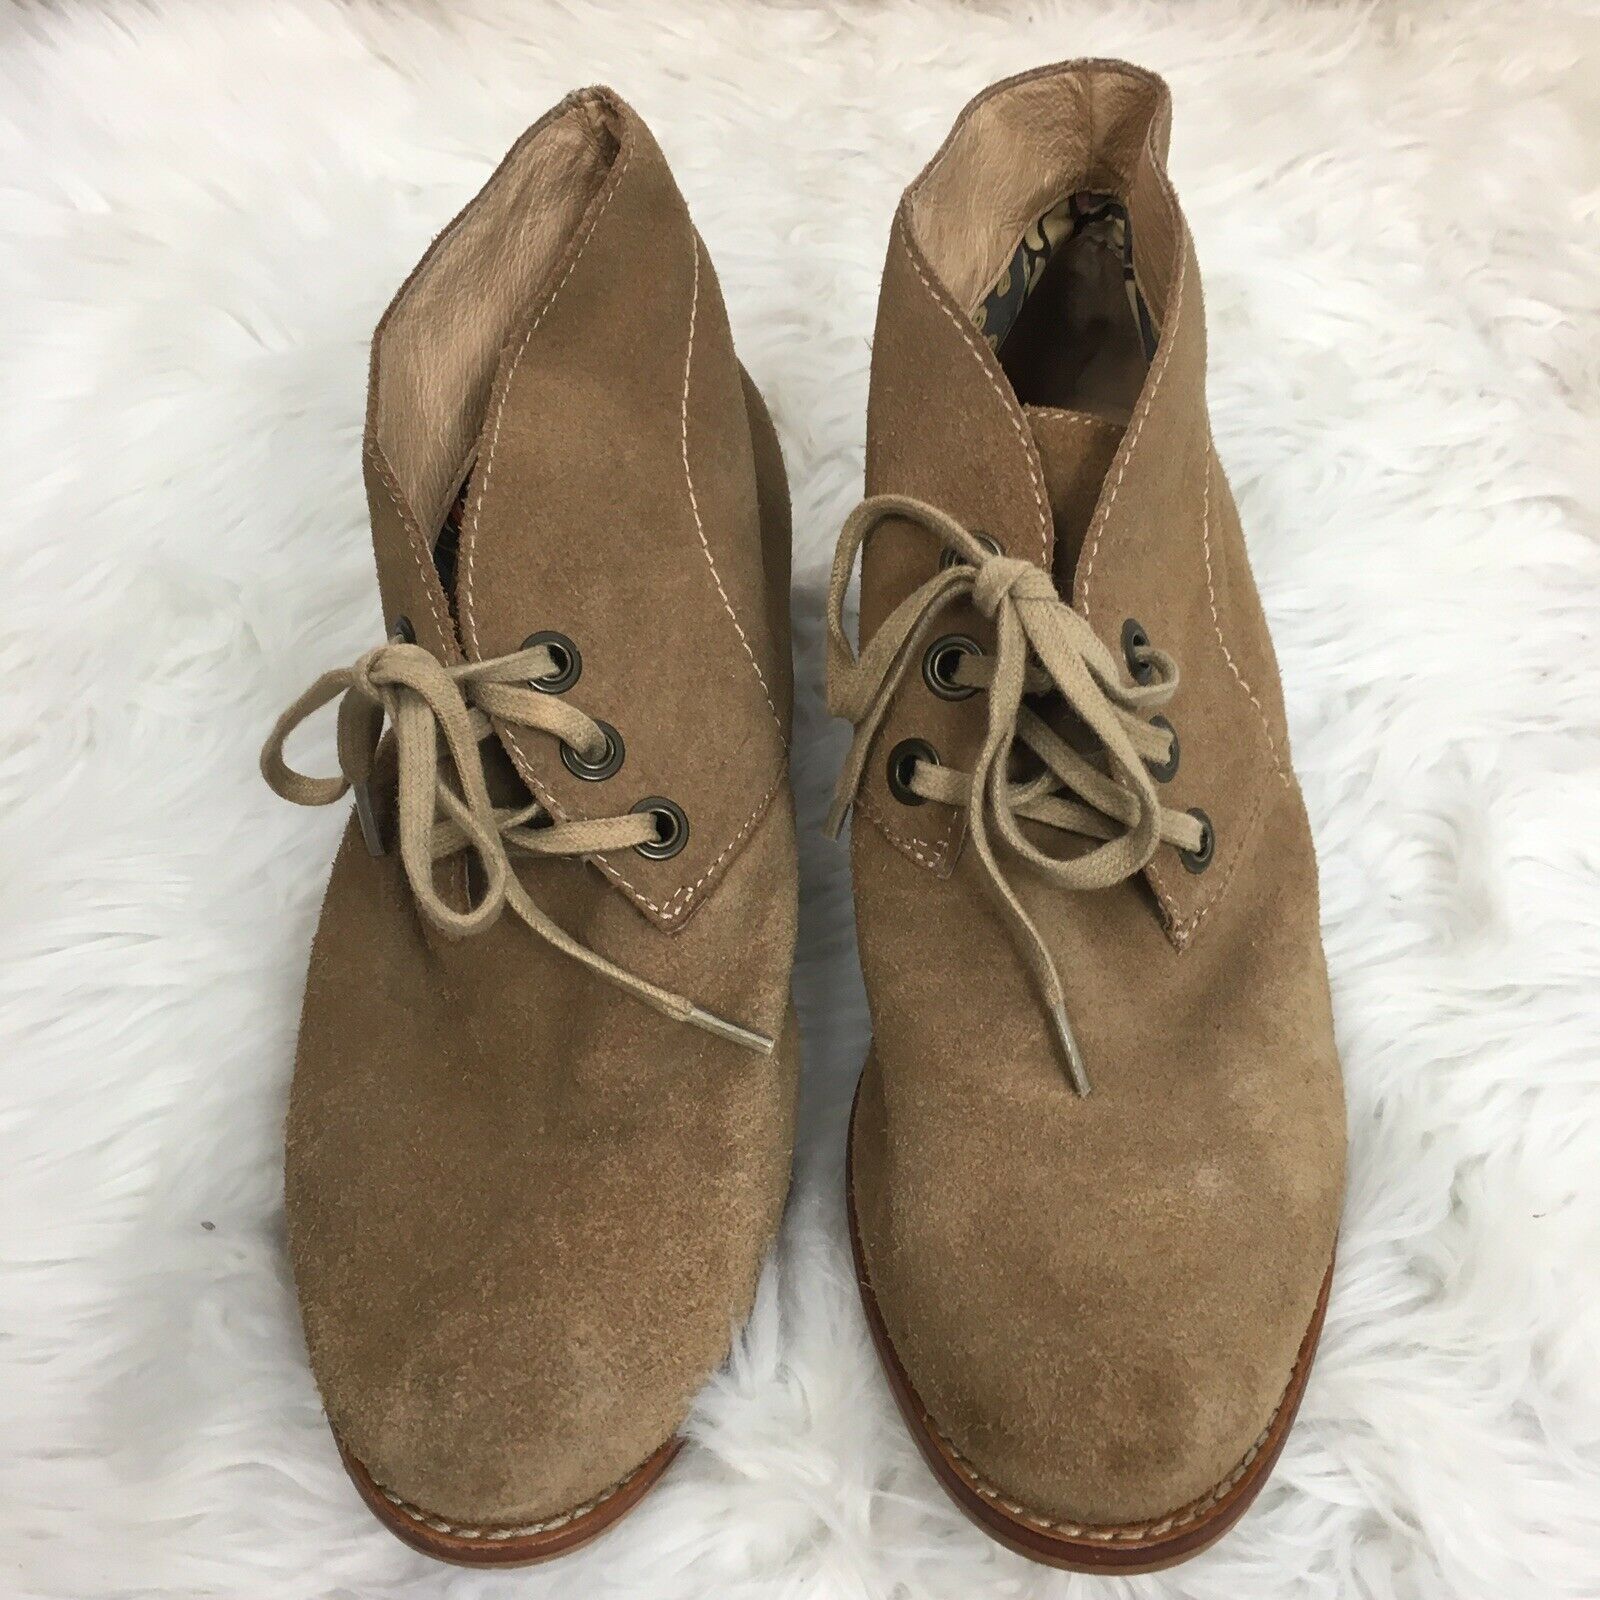 Fossil Women's Brown Suede Low Heel Lace Up Suede Boots Booties Size 7. ...